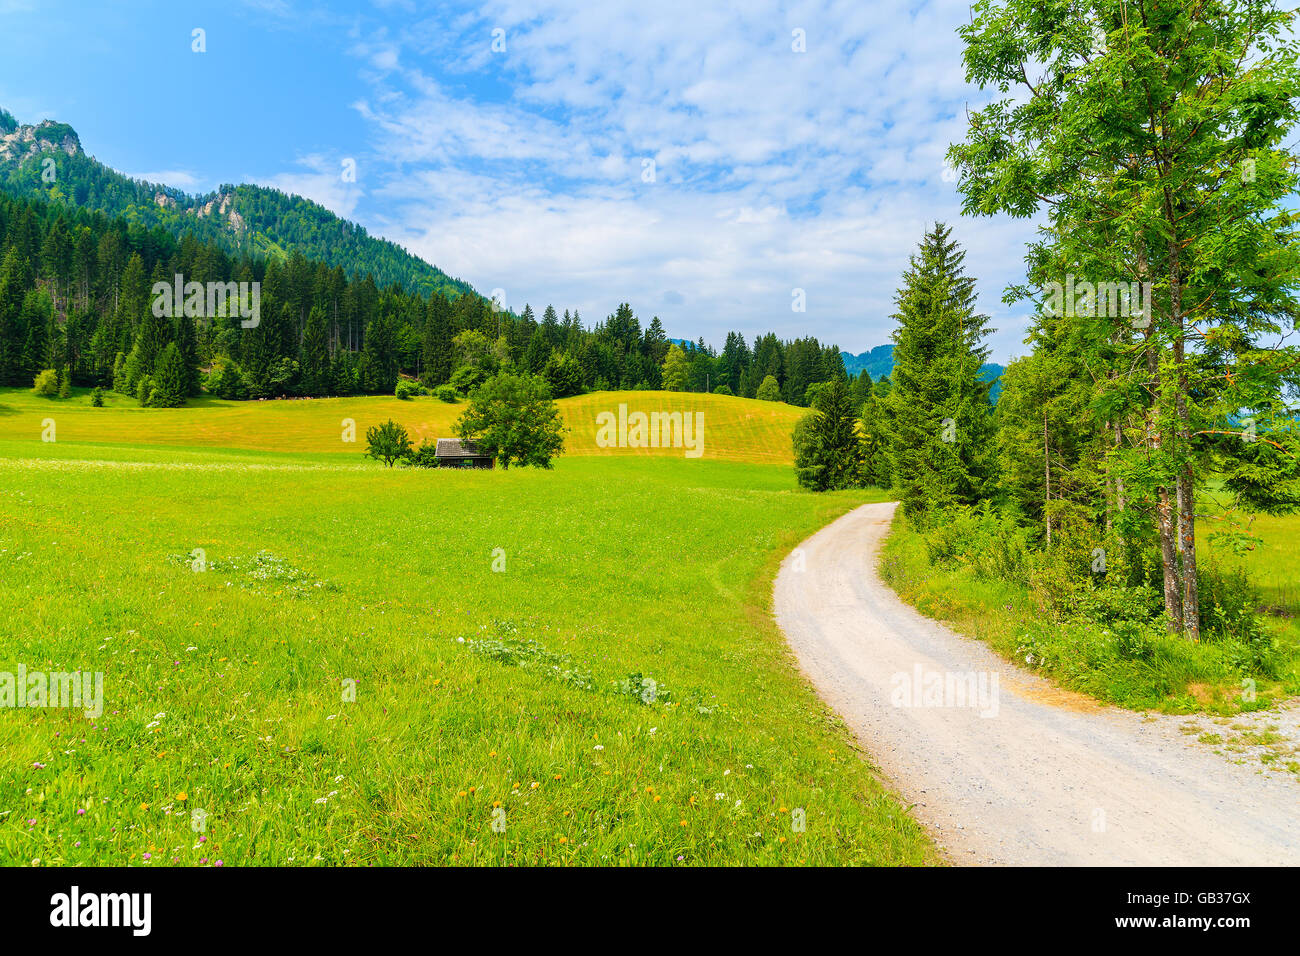 Road in countryside summer landscape of Alps Mountains, Weissensee lake, Austria Stock Photo